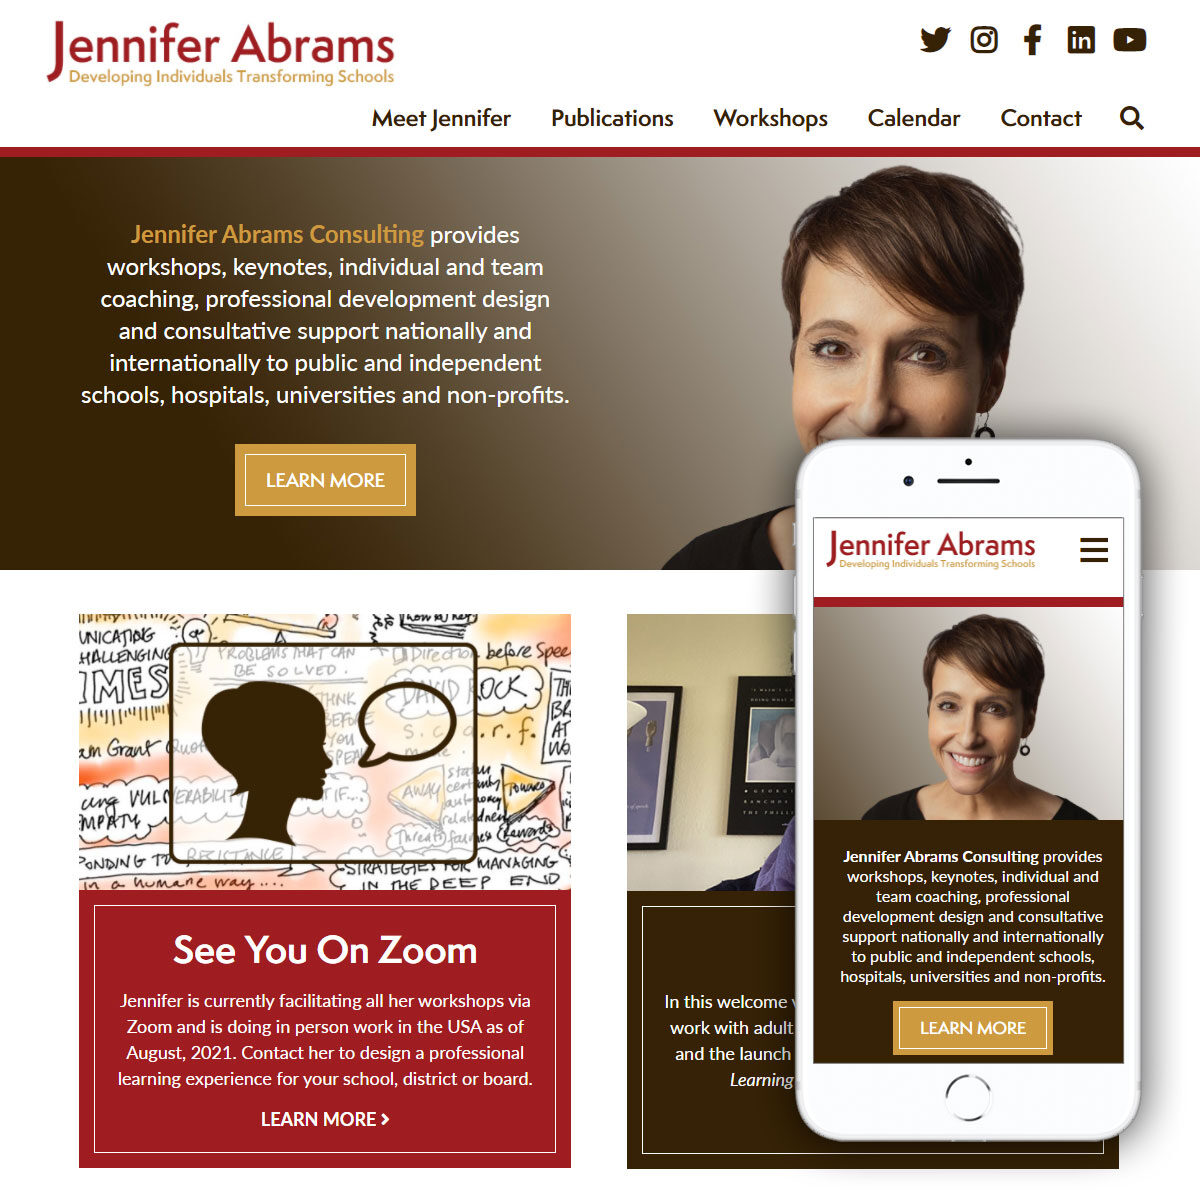 Jennifer Abrams Consulting